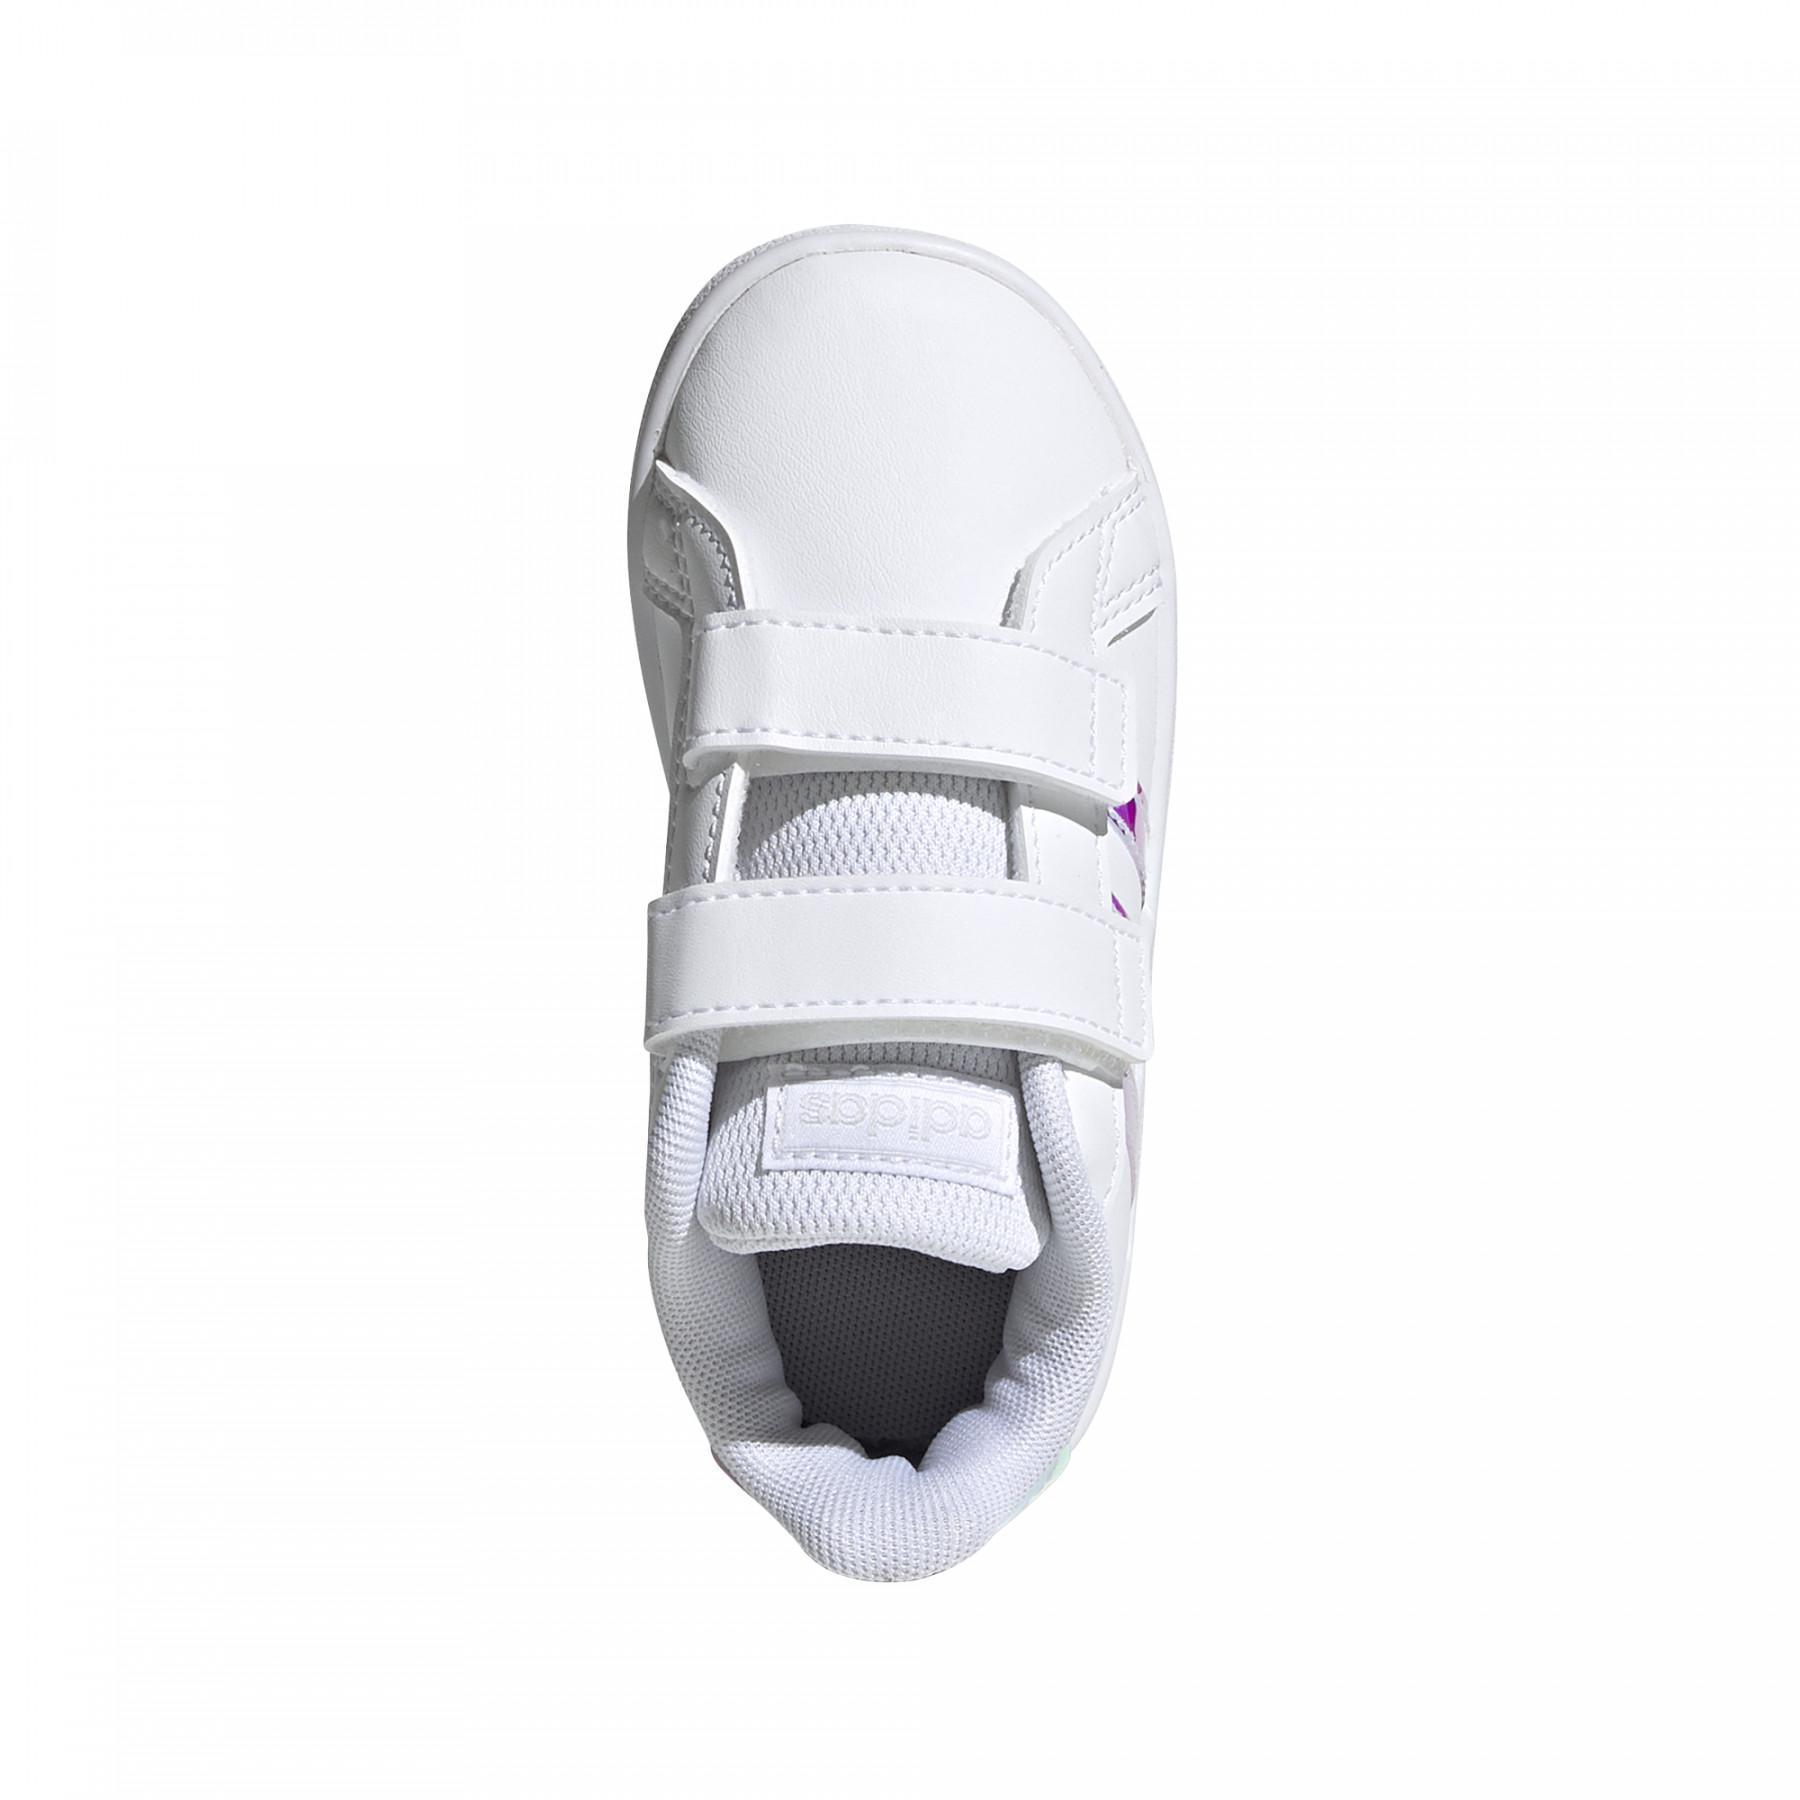 Baby sneakers adidas Grand Court